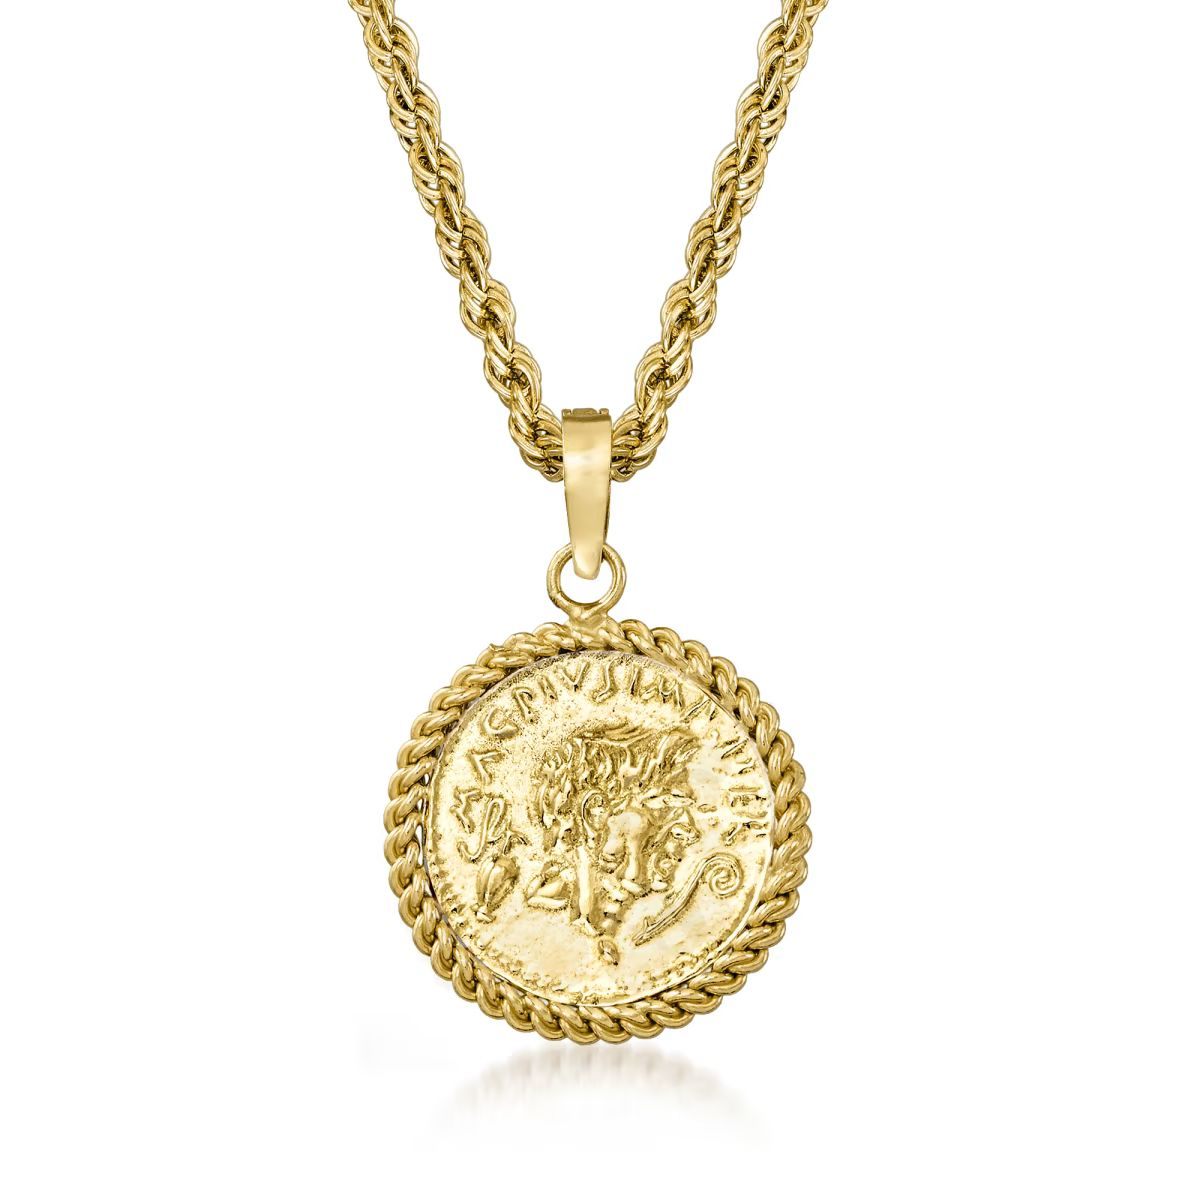 Replica Coin Pendant Necklace in 18kt Gold Over Sterling. 18" | Ross-Simons